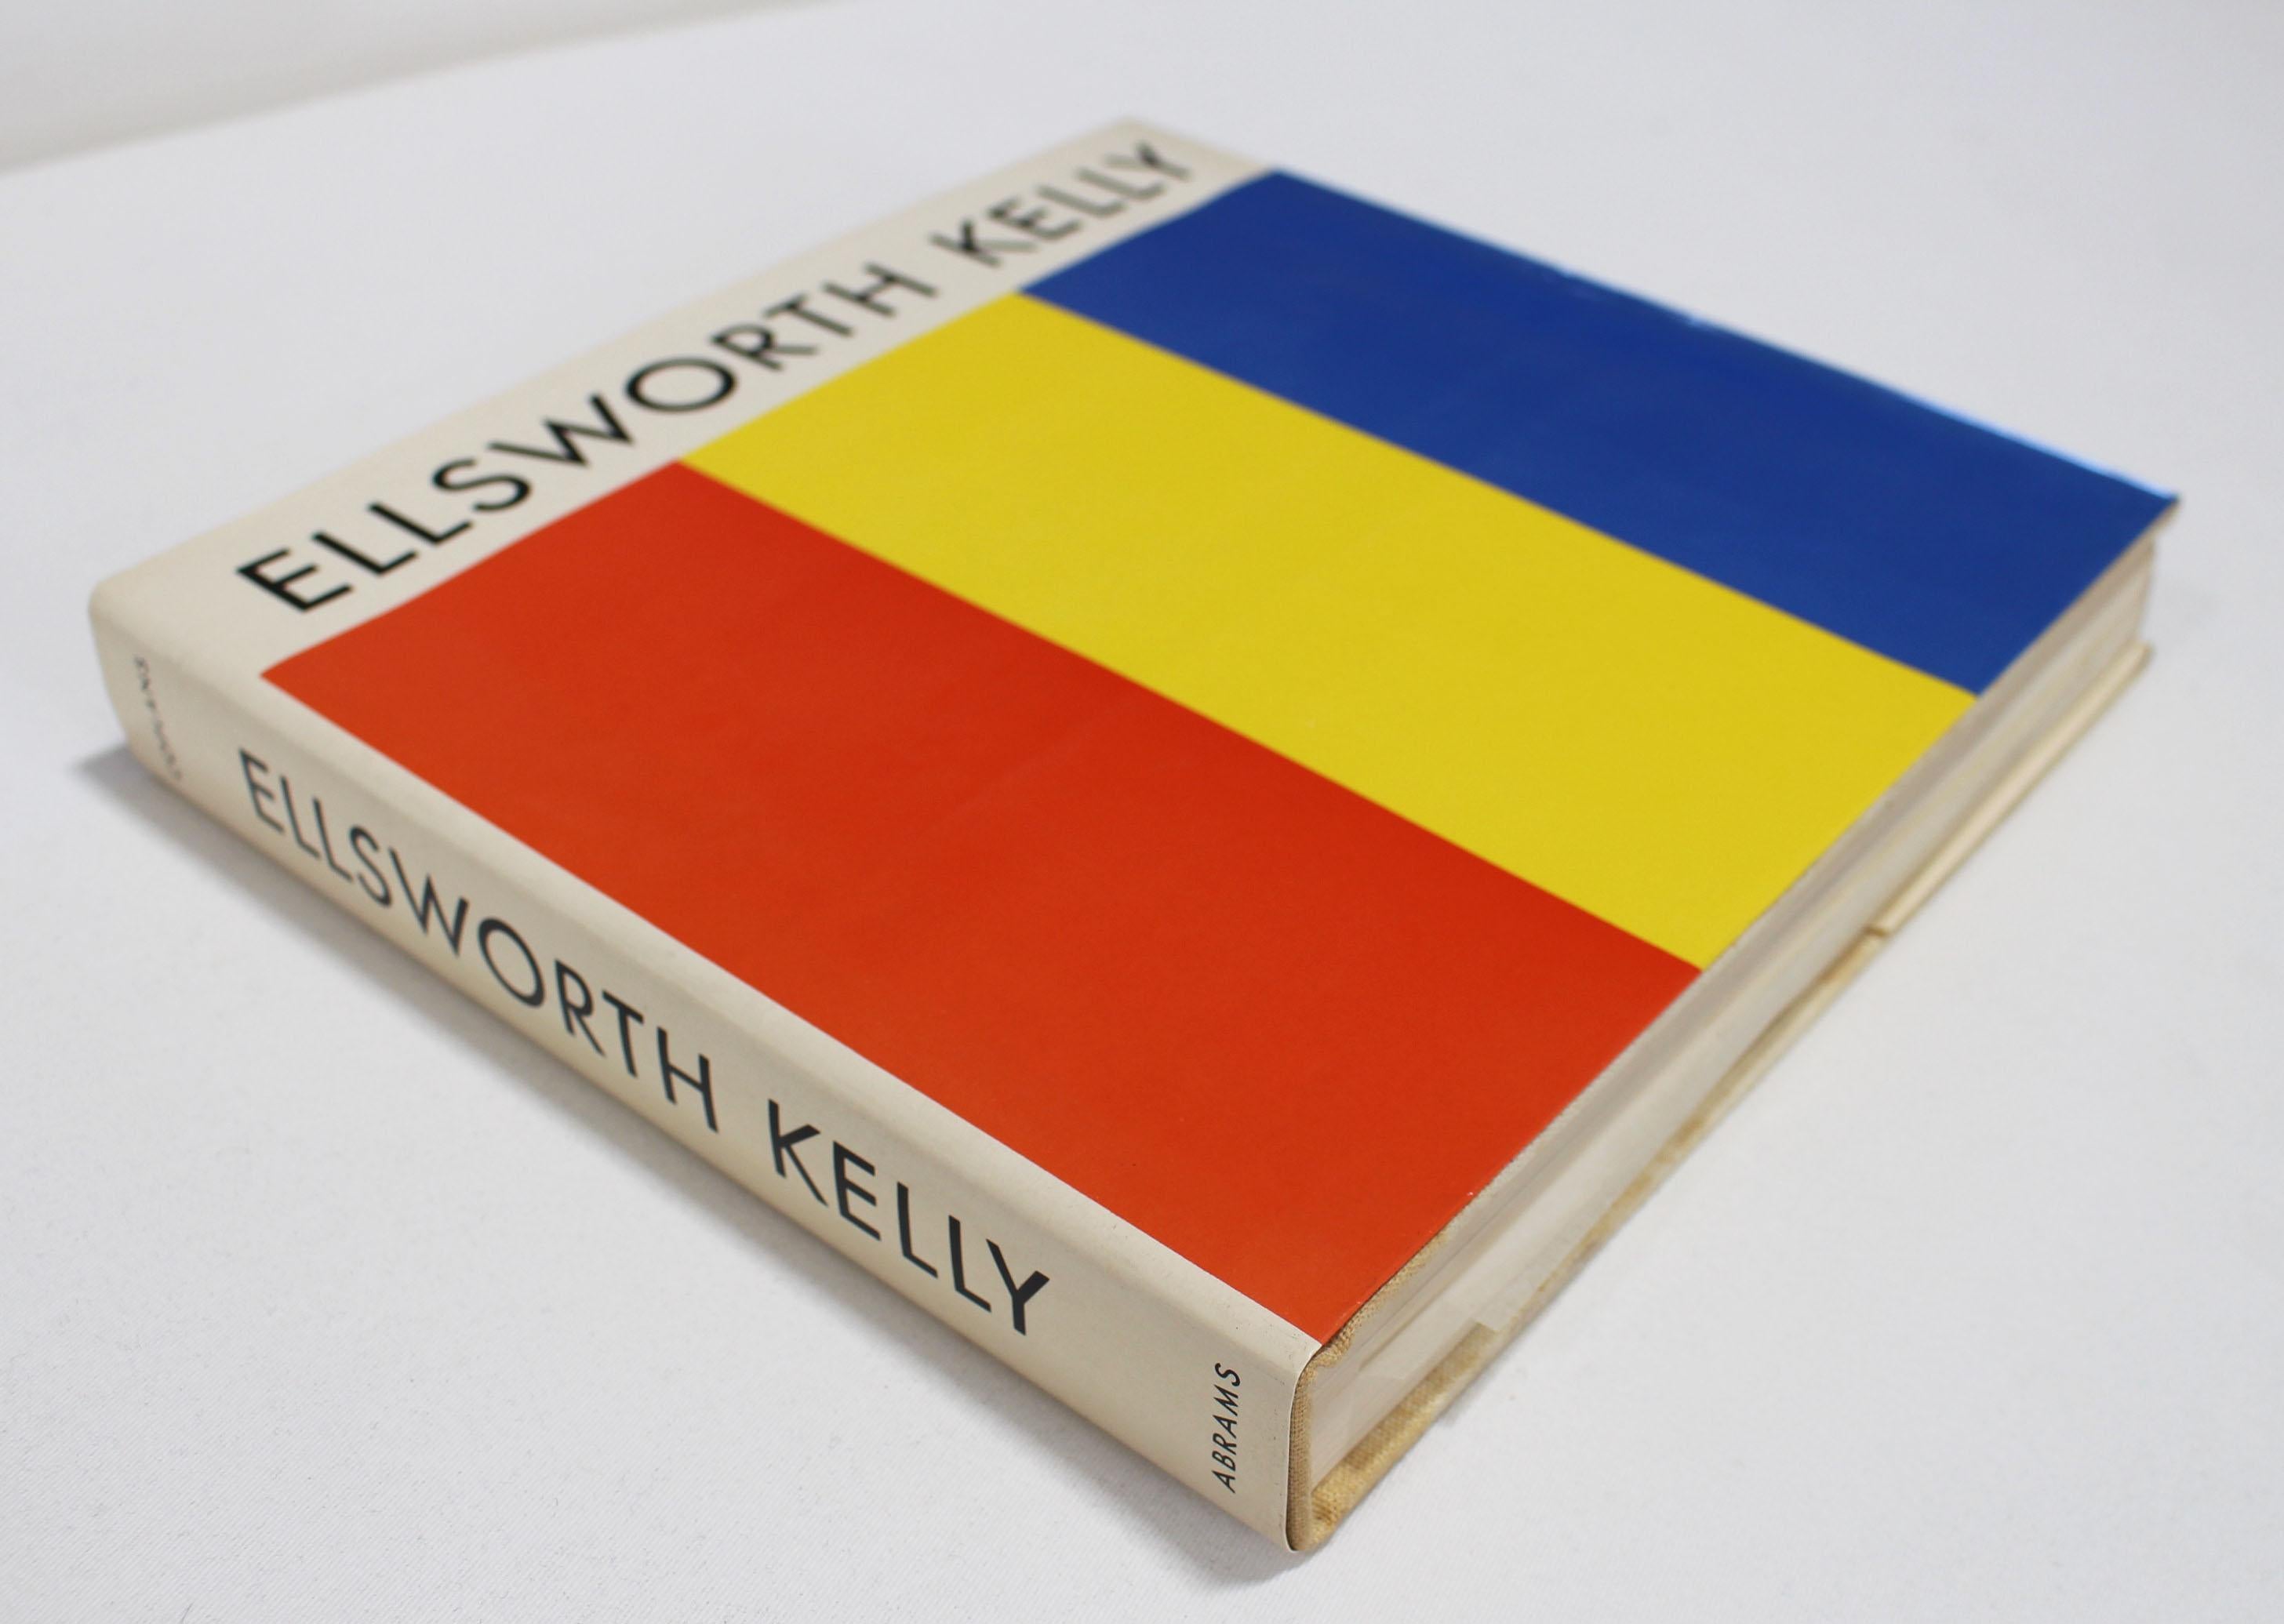 A rare first edition signed copy of 'Ellsworth Kelly' published by Abrams, NY (1971). With 225 illustrations, 68 in color. Signed by Ellsworth Kelly. Condition consistent with age. Some discoloring and marks. Text by John Koplans, published by Harry